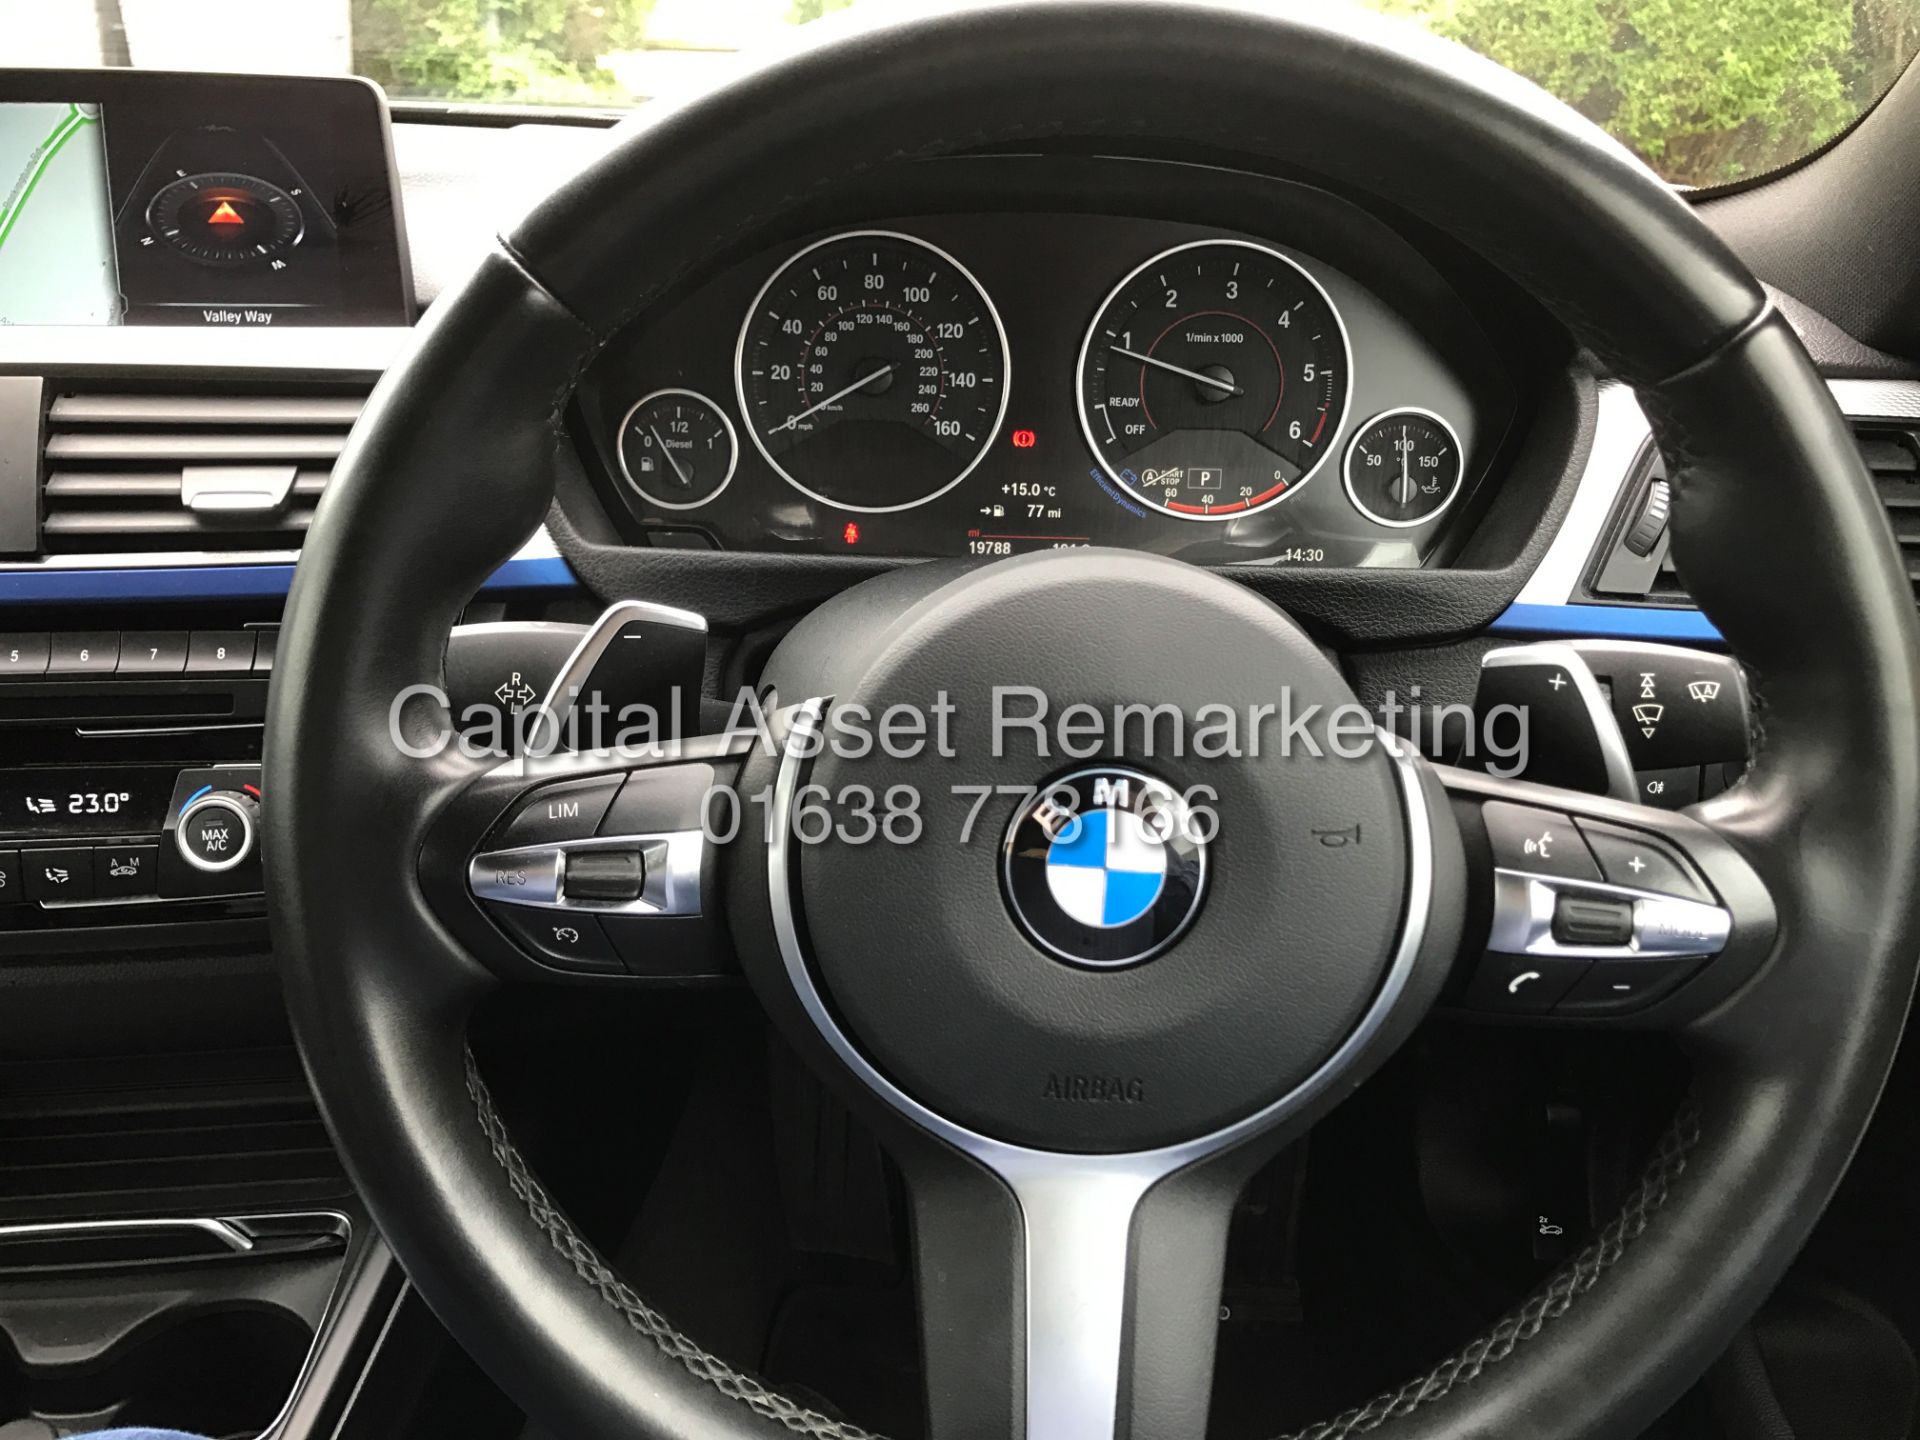 BMW 420D AUTO 8 SPEED "M-SPORT" COUPE (2017 MODEL) 1 OWNER WITH BMW HISTORY - SAT NAV - I DRIVE - Image 18 of 25